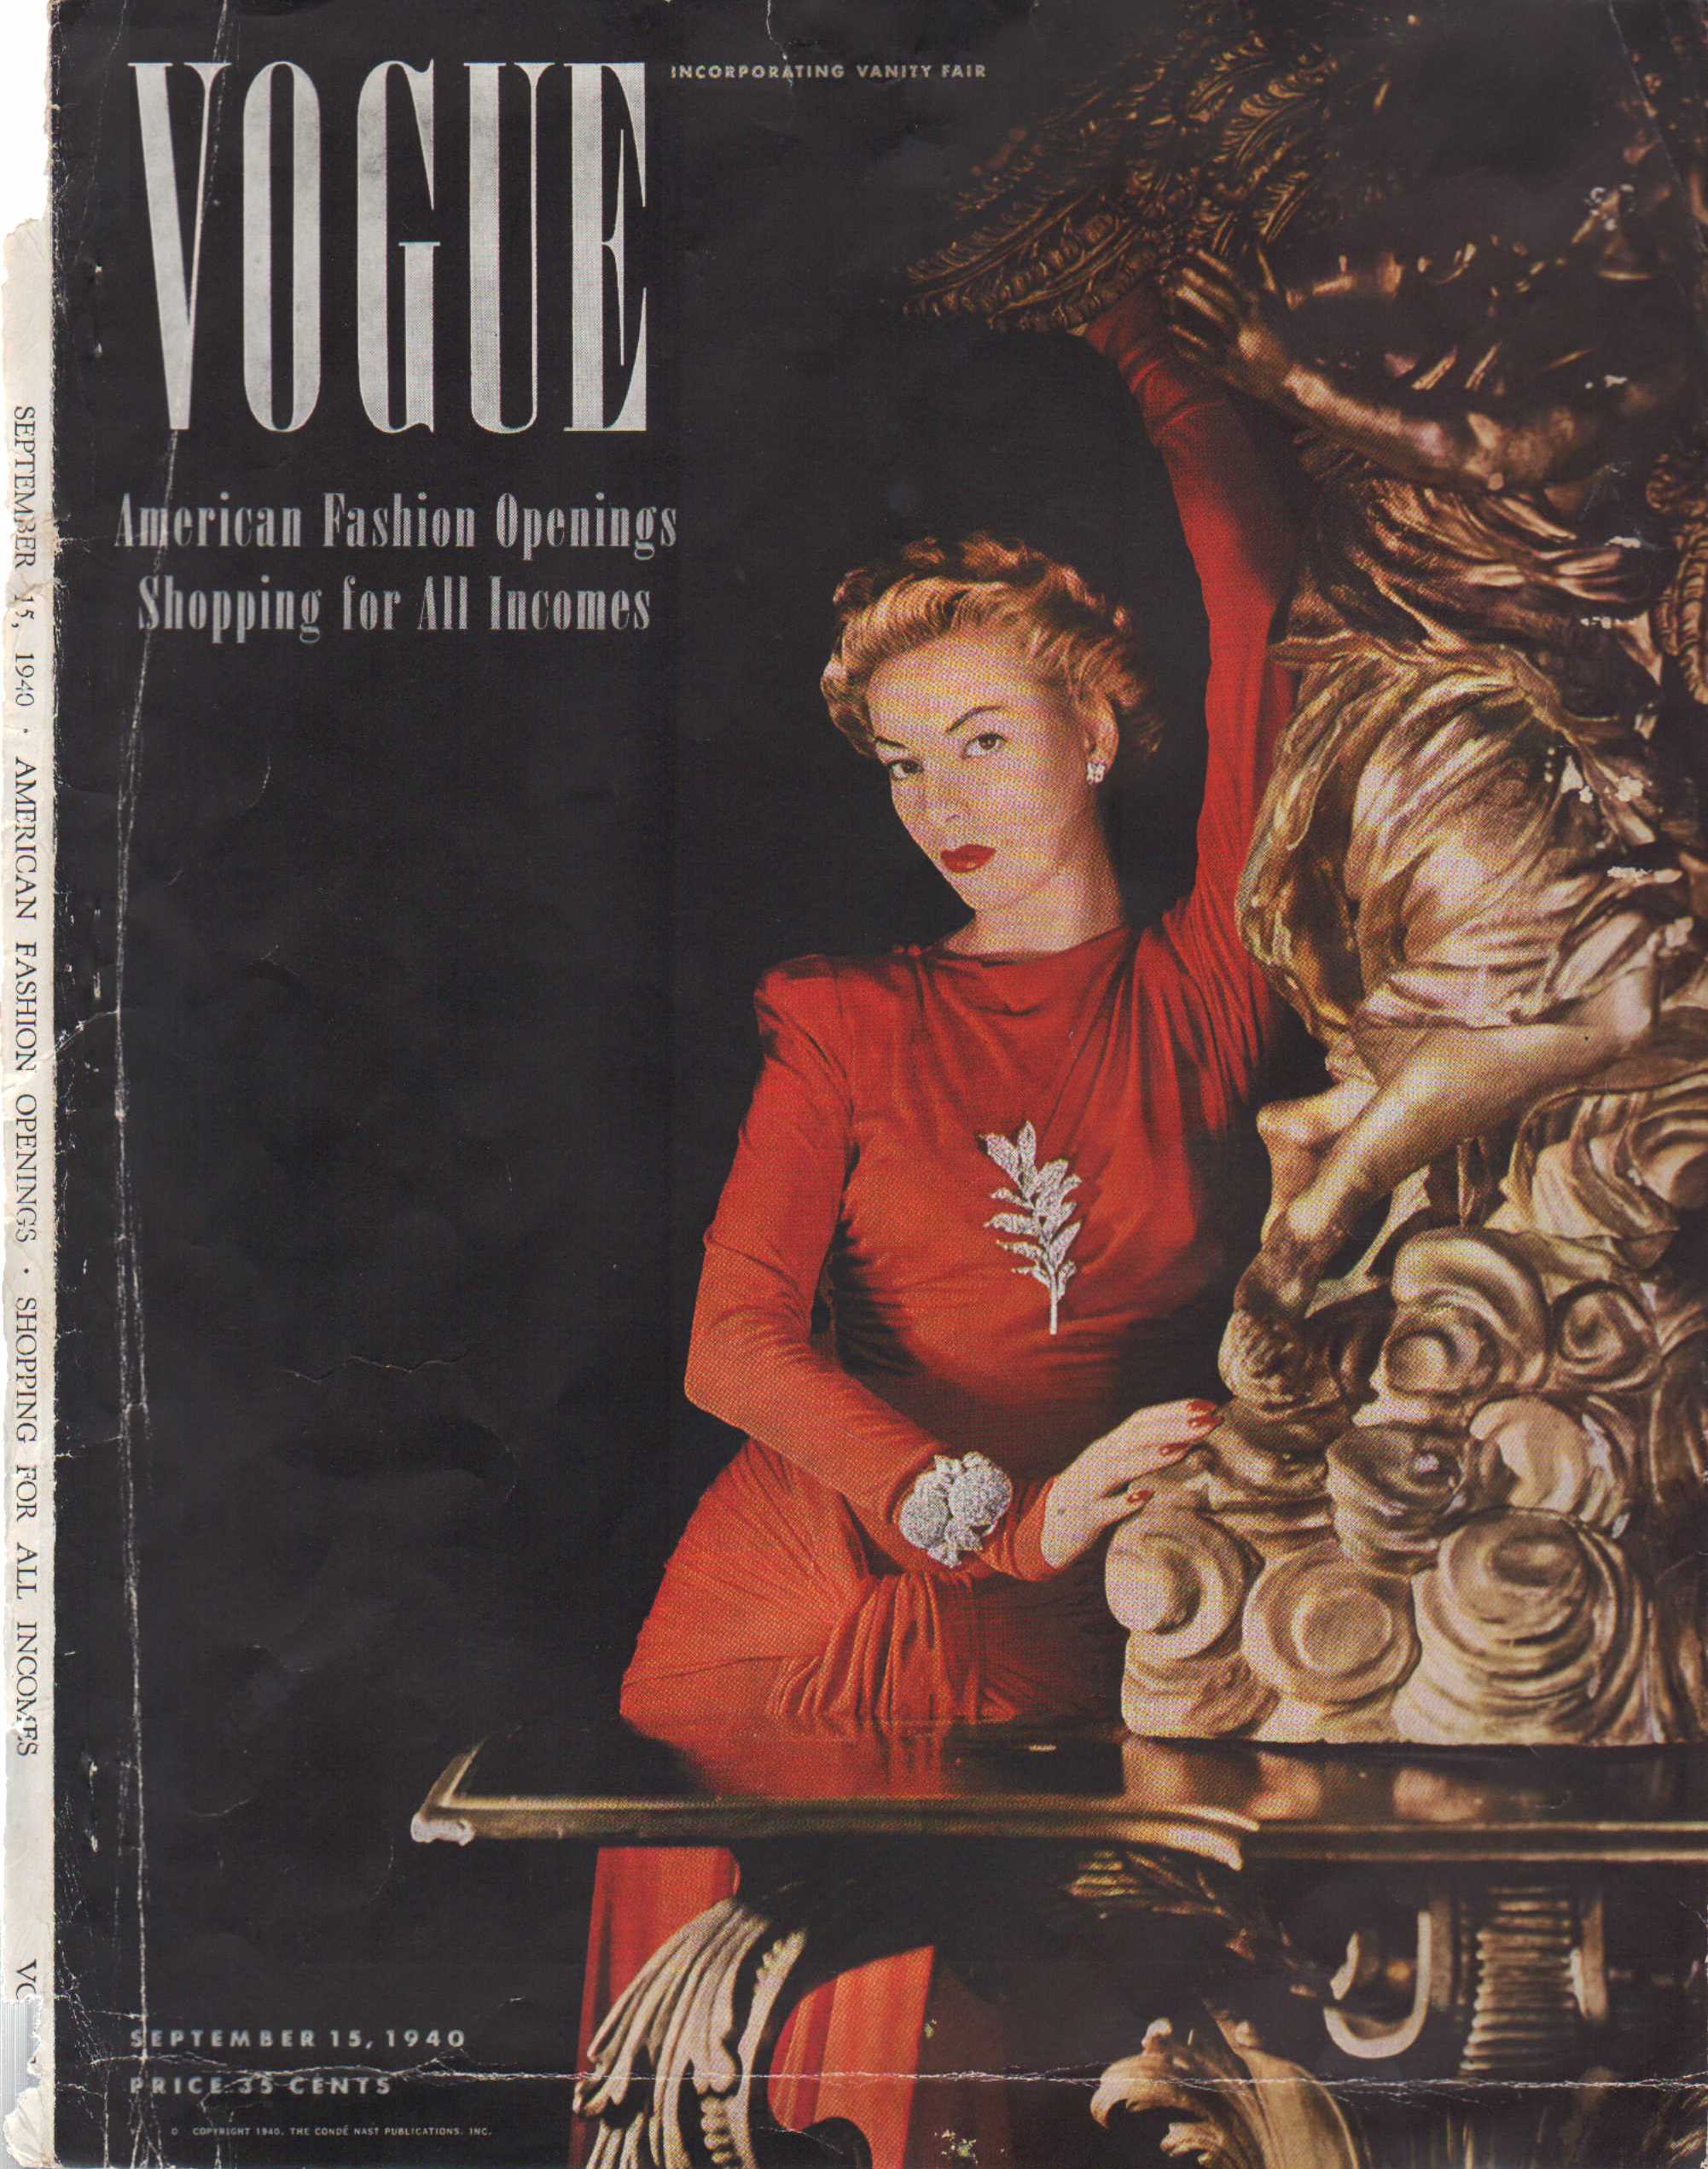 Image for Vogue Magazine, September 15, 1940 - Cover Only